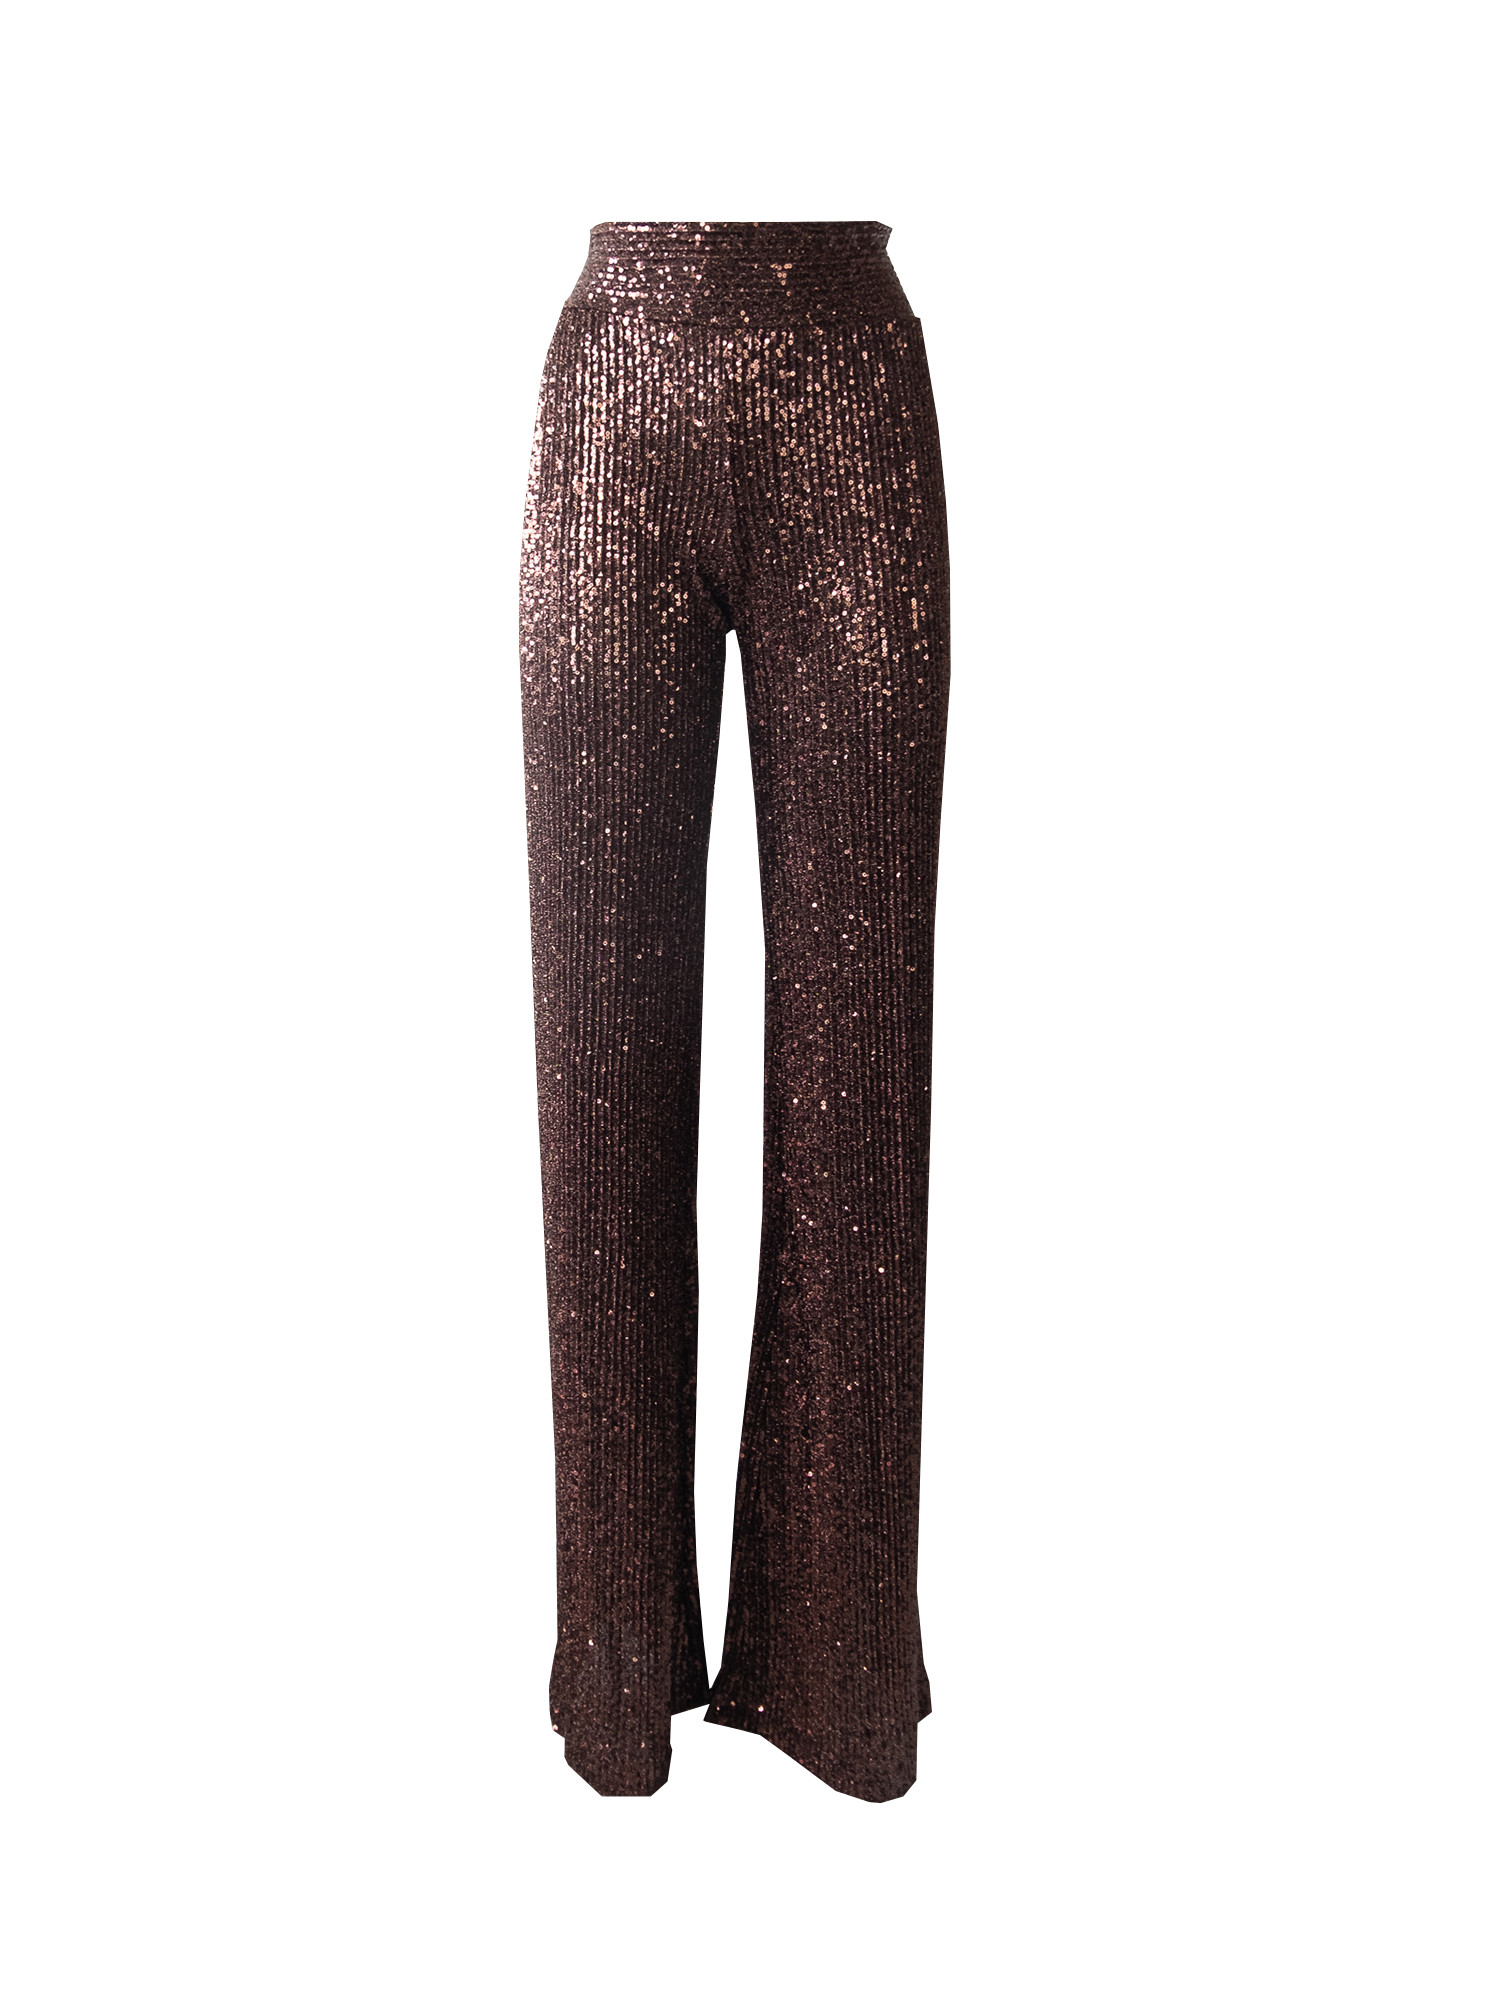 MIMI - trousers in brown sequin